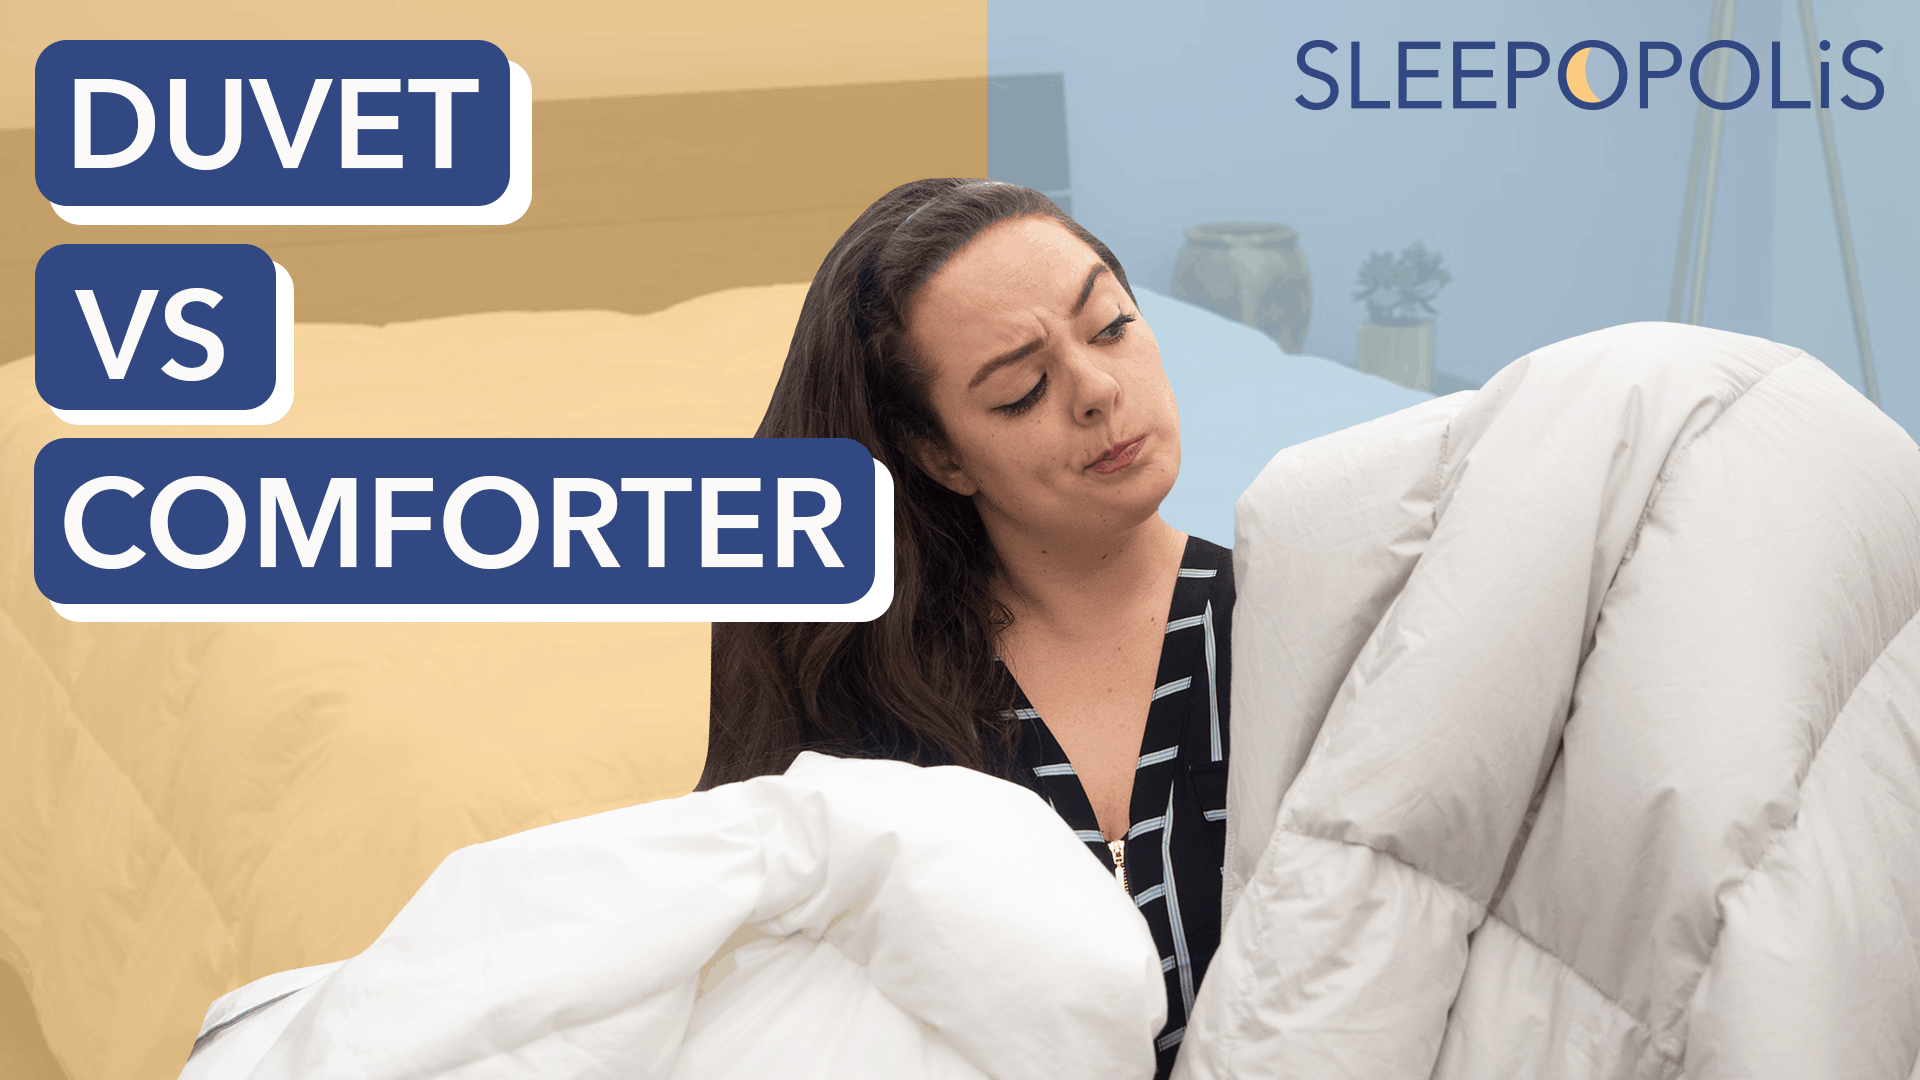 Duvet Vs Comforter Is There A Difference, Are Duvet Covers Better Than Comforters